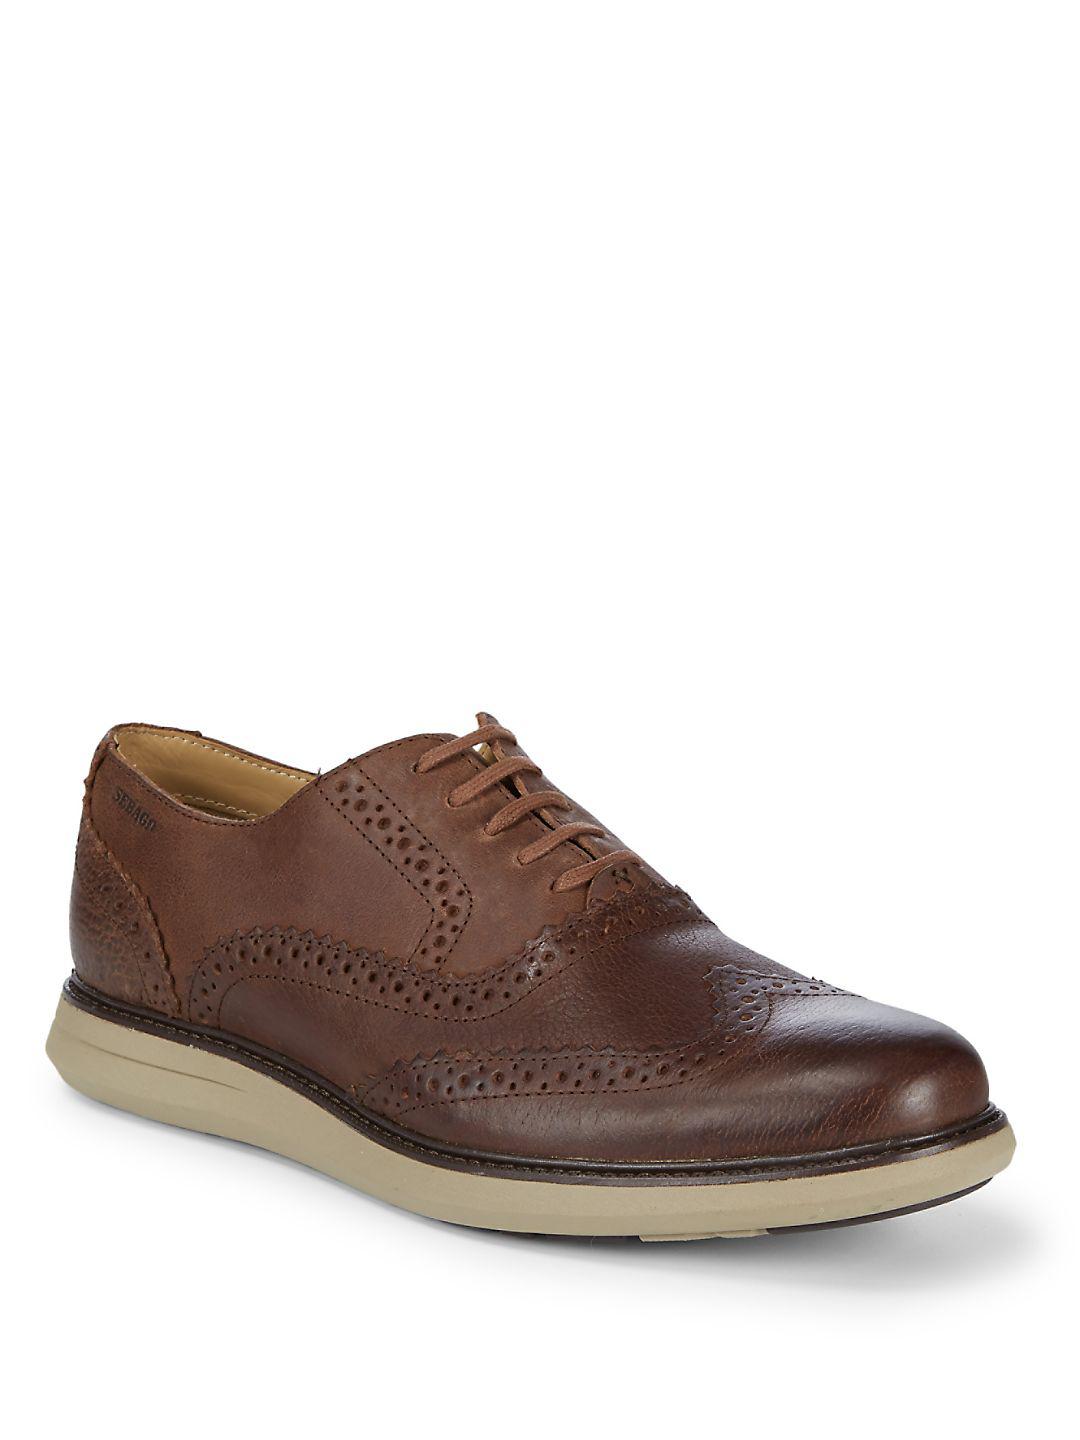 Sebago Leather Perforated Wingtip Shoes in Brown for Men - Lyst